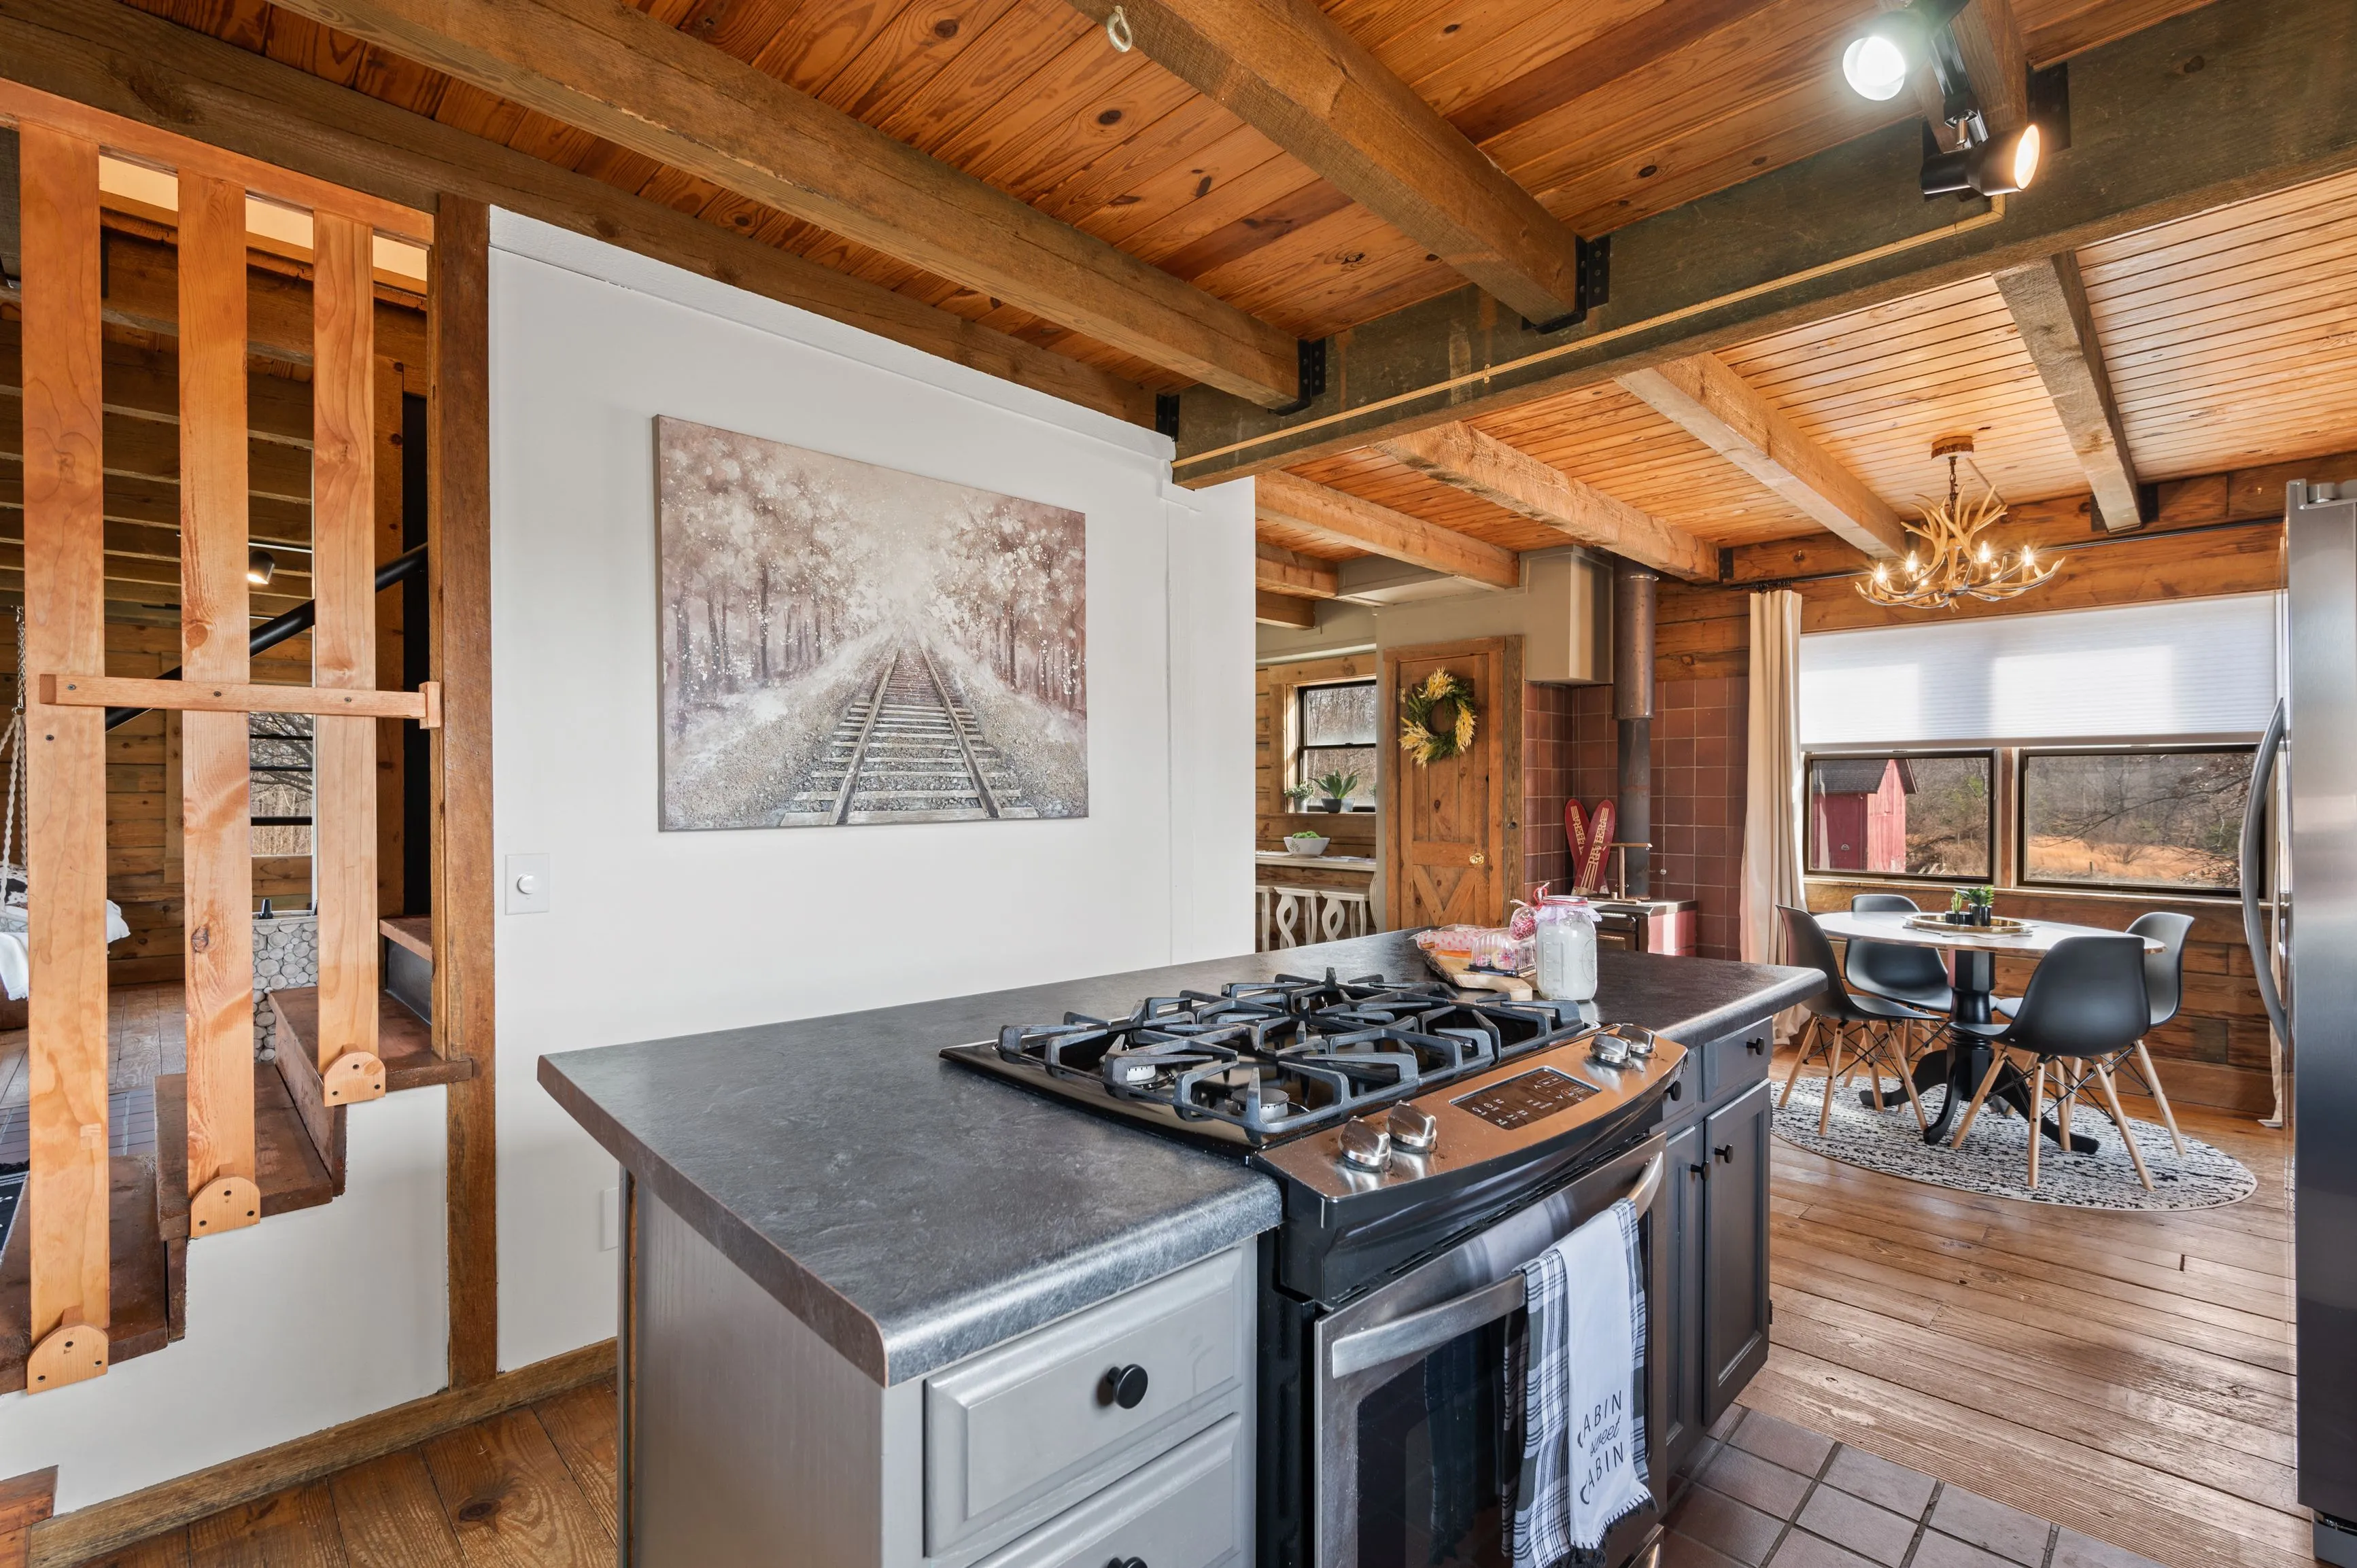 Rustic-style kitchen interior with exposed beams, hardwood floors, a gas stove, a painting of train tracks, and an adjoining dining area with a modern table set.